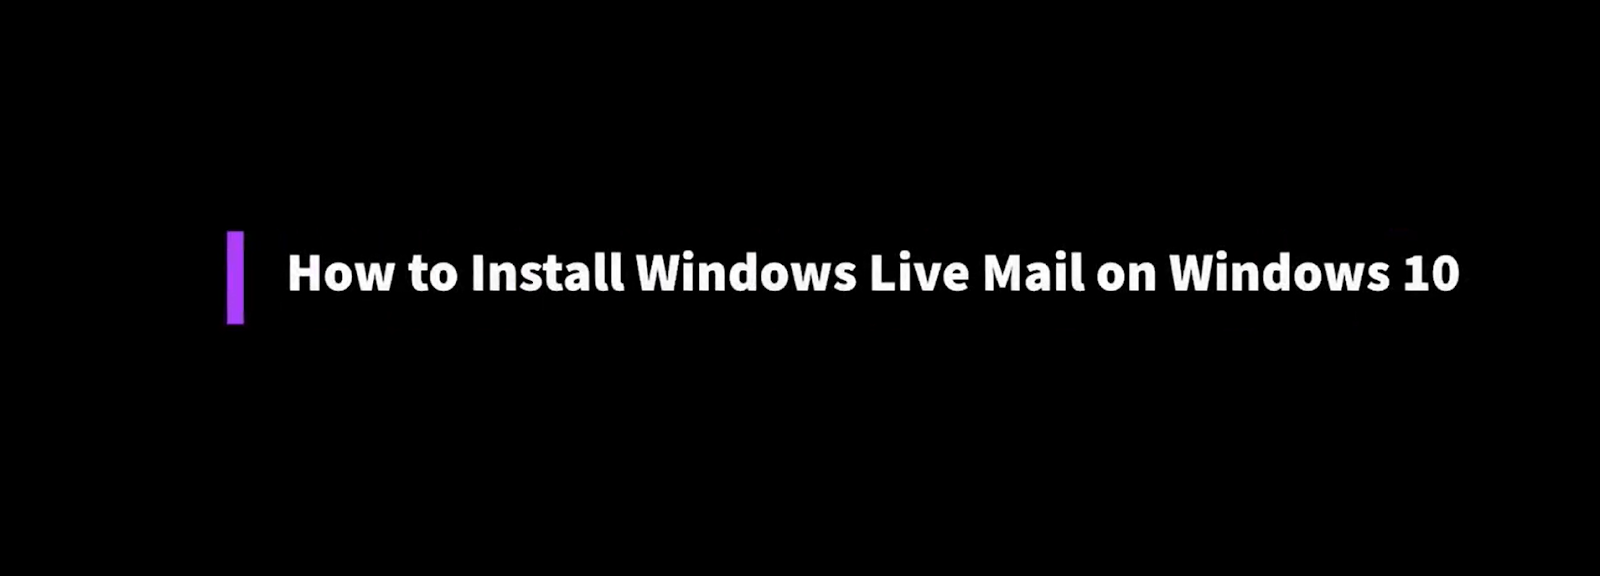 words how to install windows live mail on windows 10 words on black background